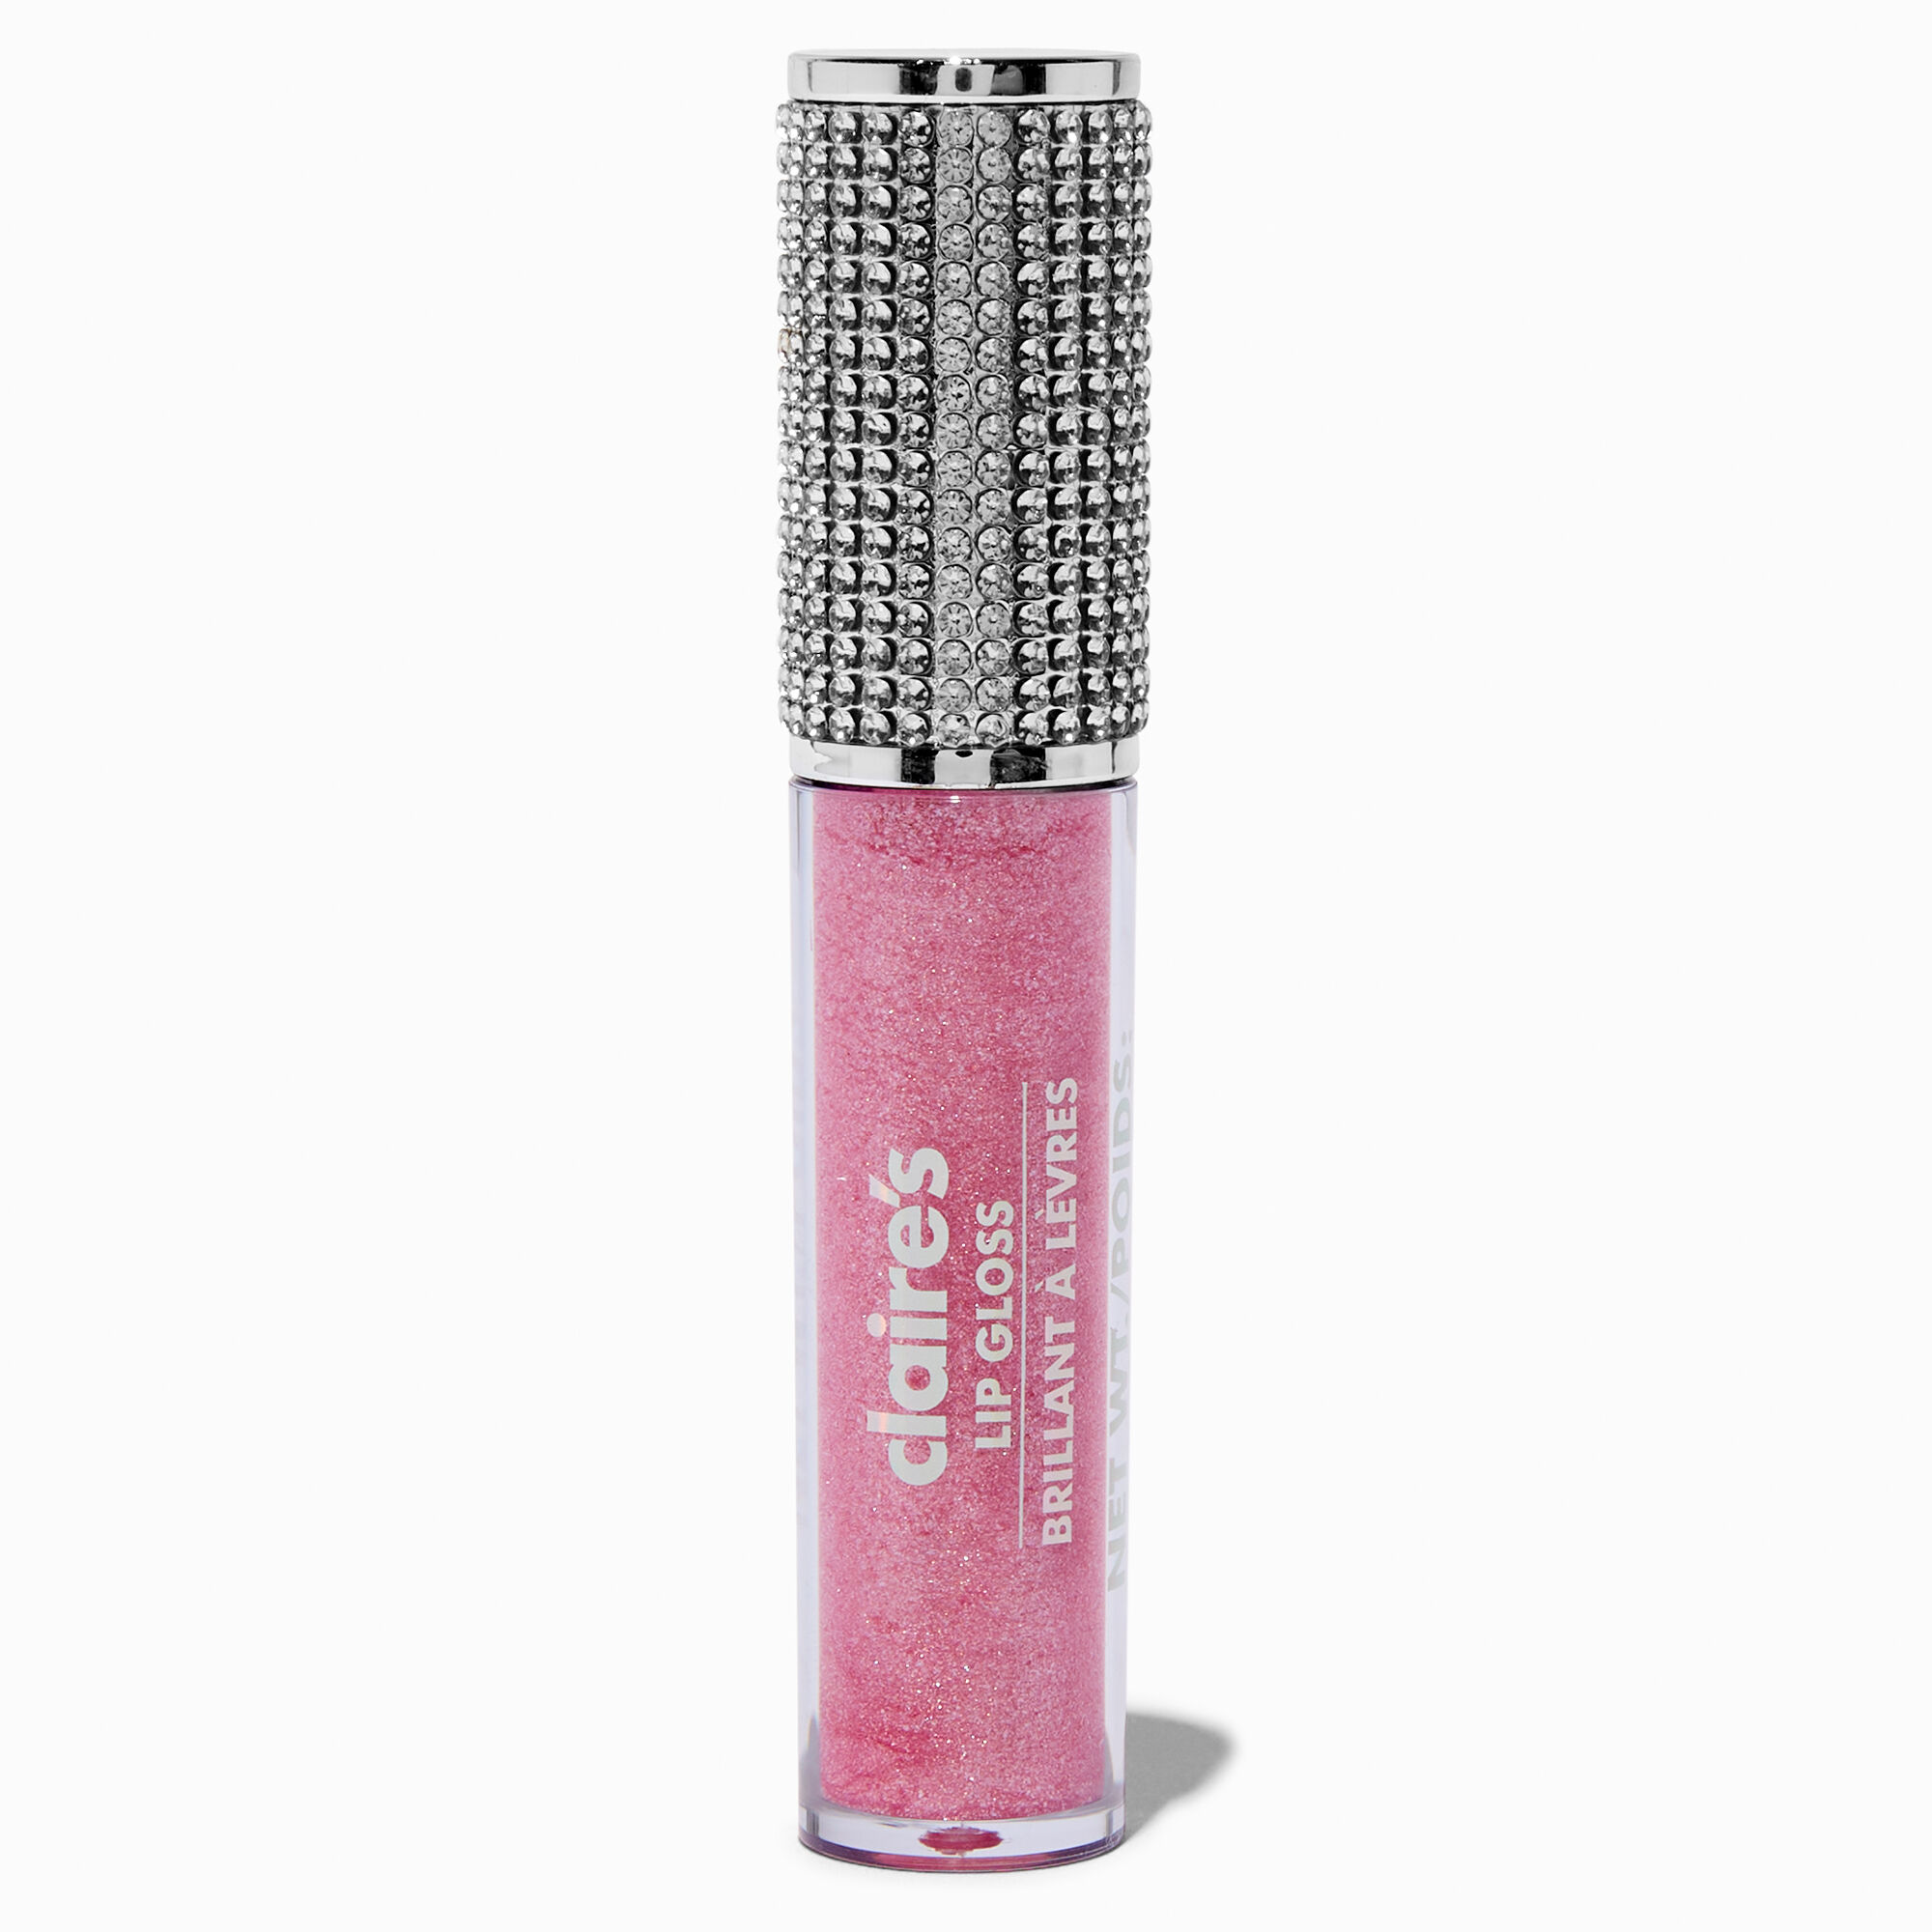 View Claires Shimmer Bling Glitter Lip Gloss Wand Pink information